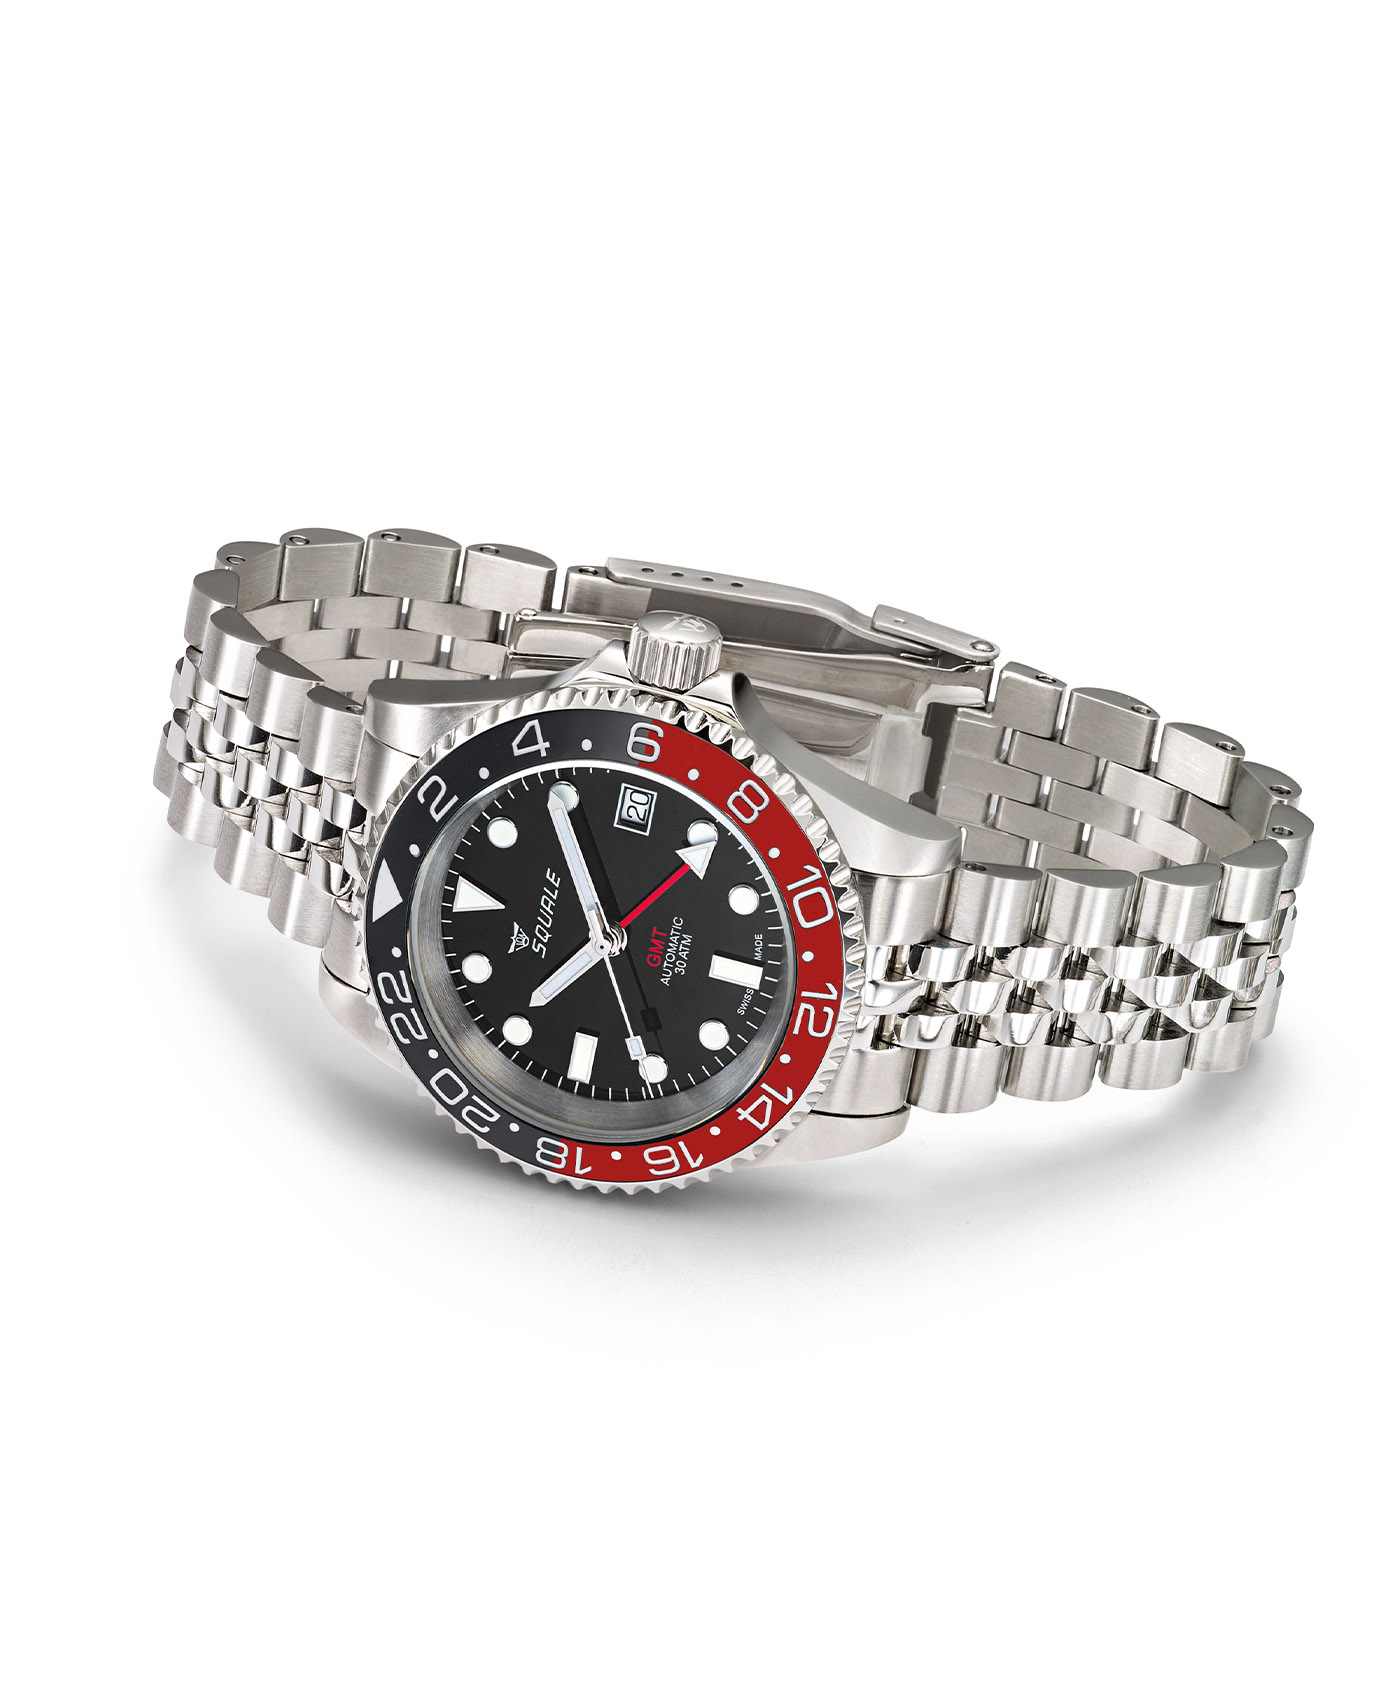 Squale 30 ATM GMT Black-Red Special Edition